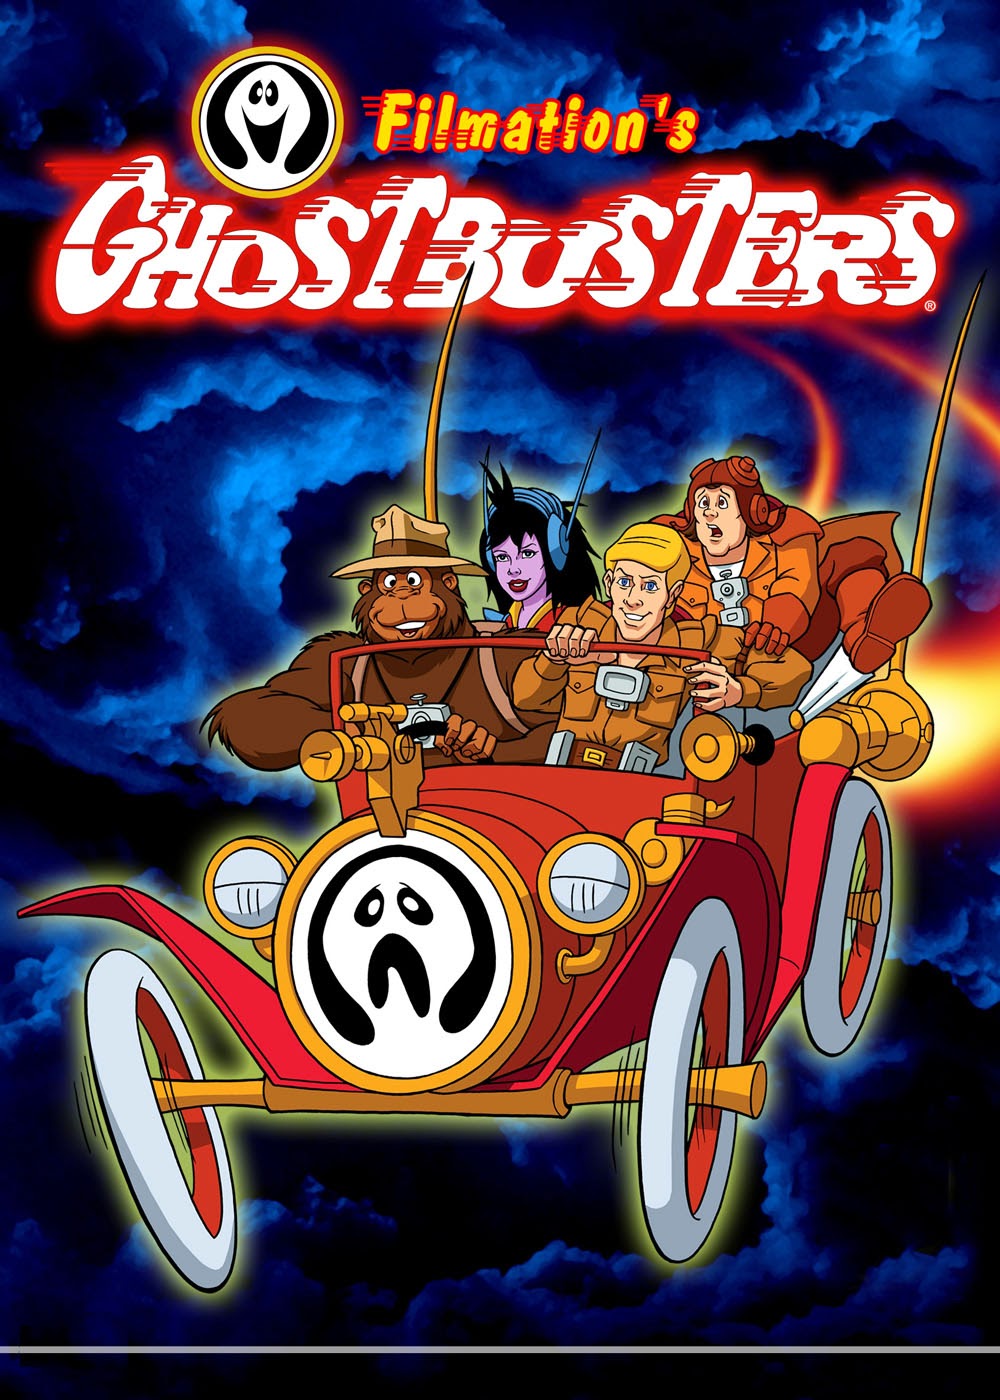 Ghostbusters (Fernsehserie)